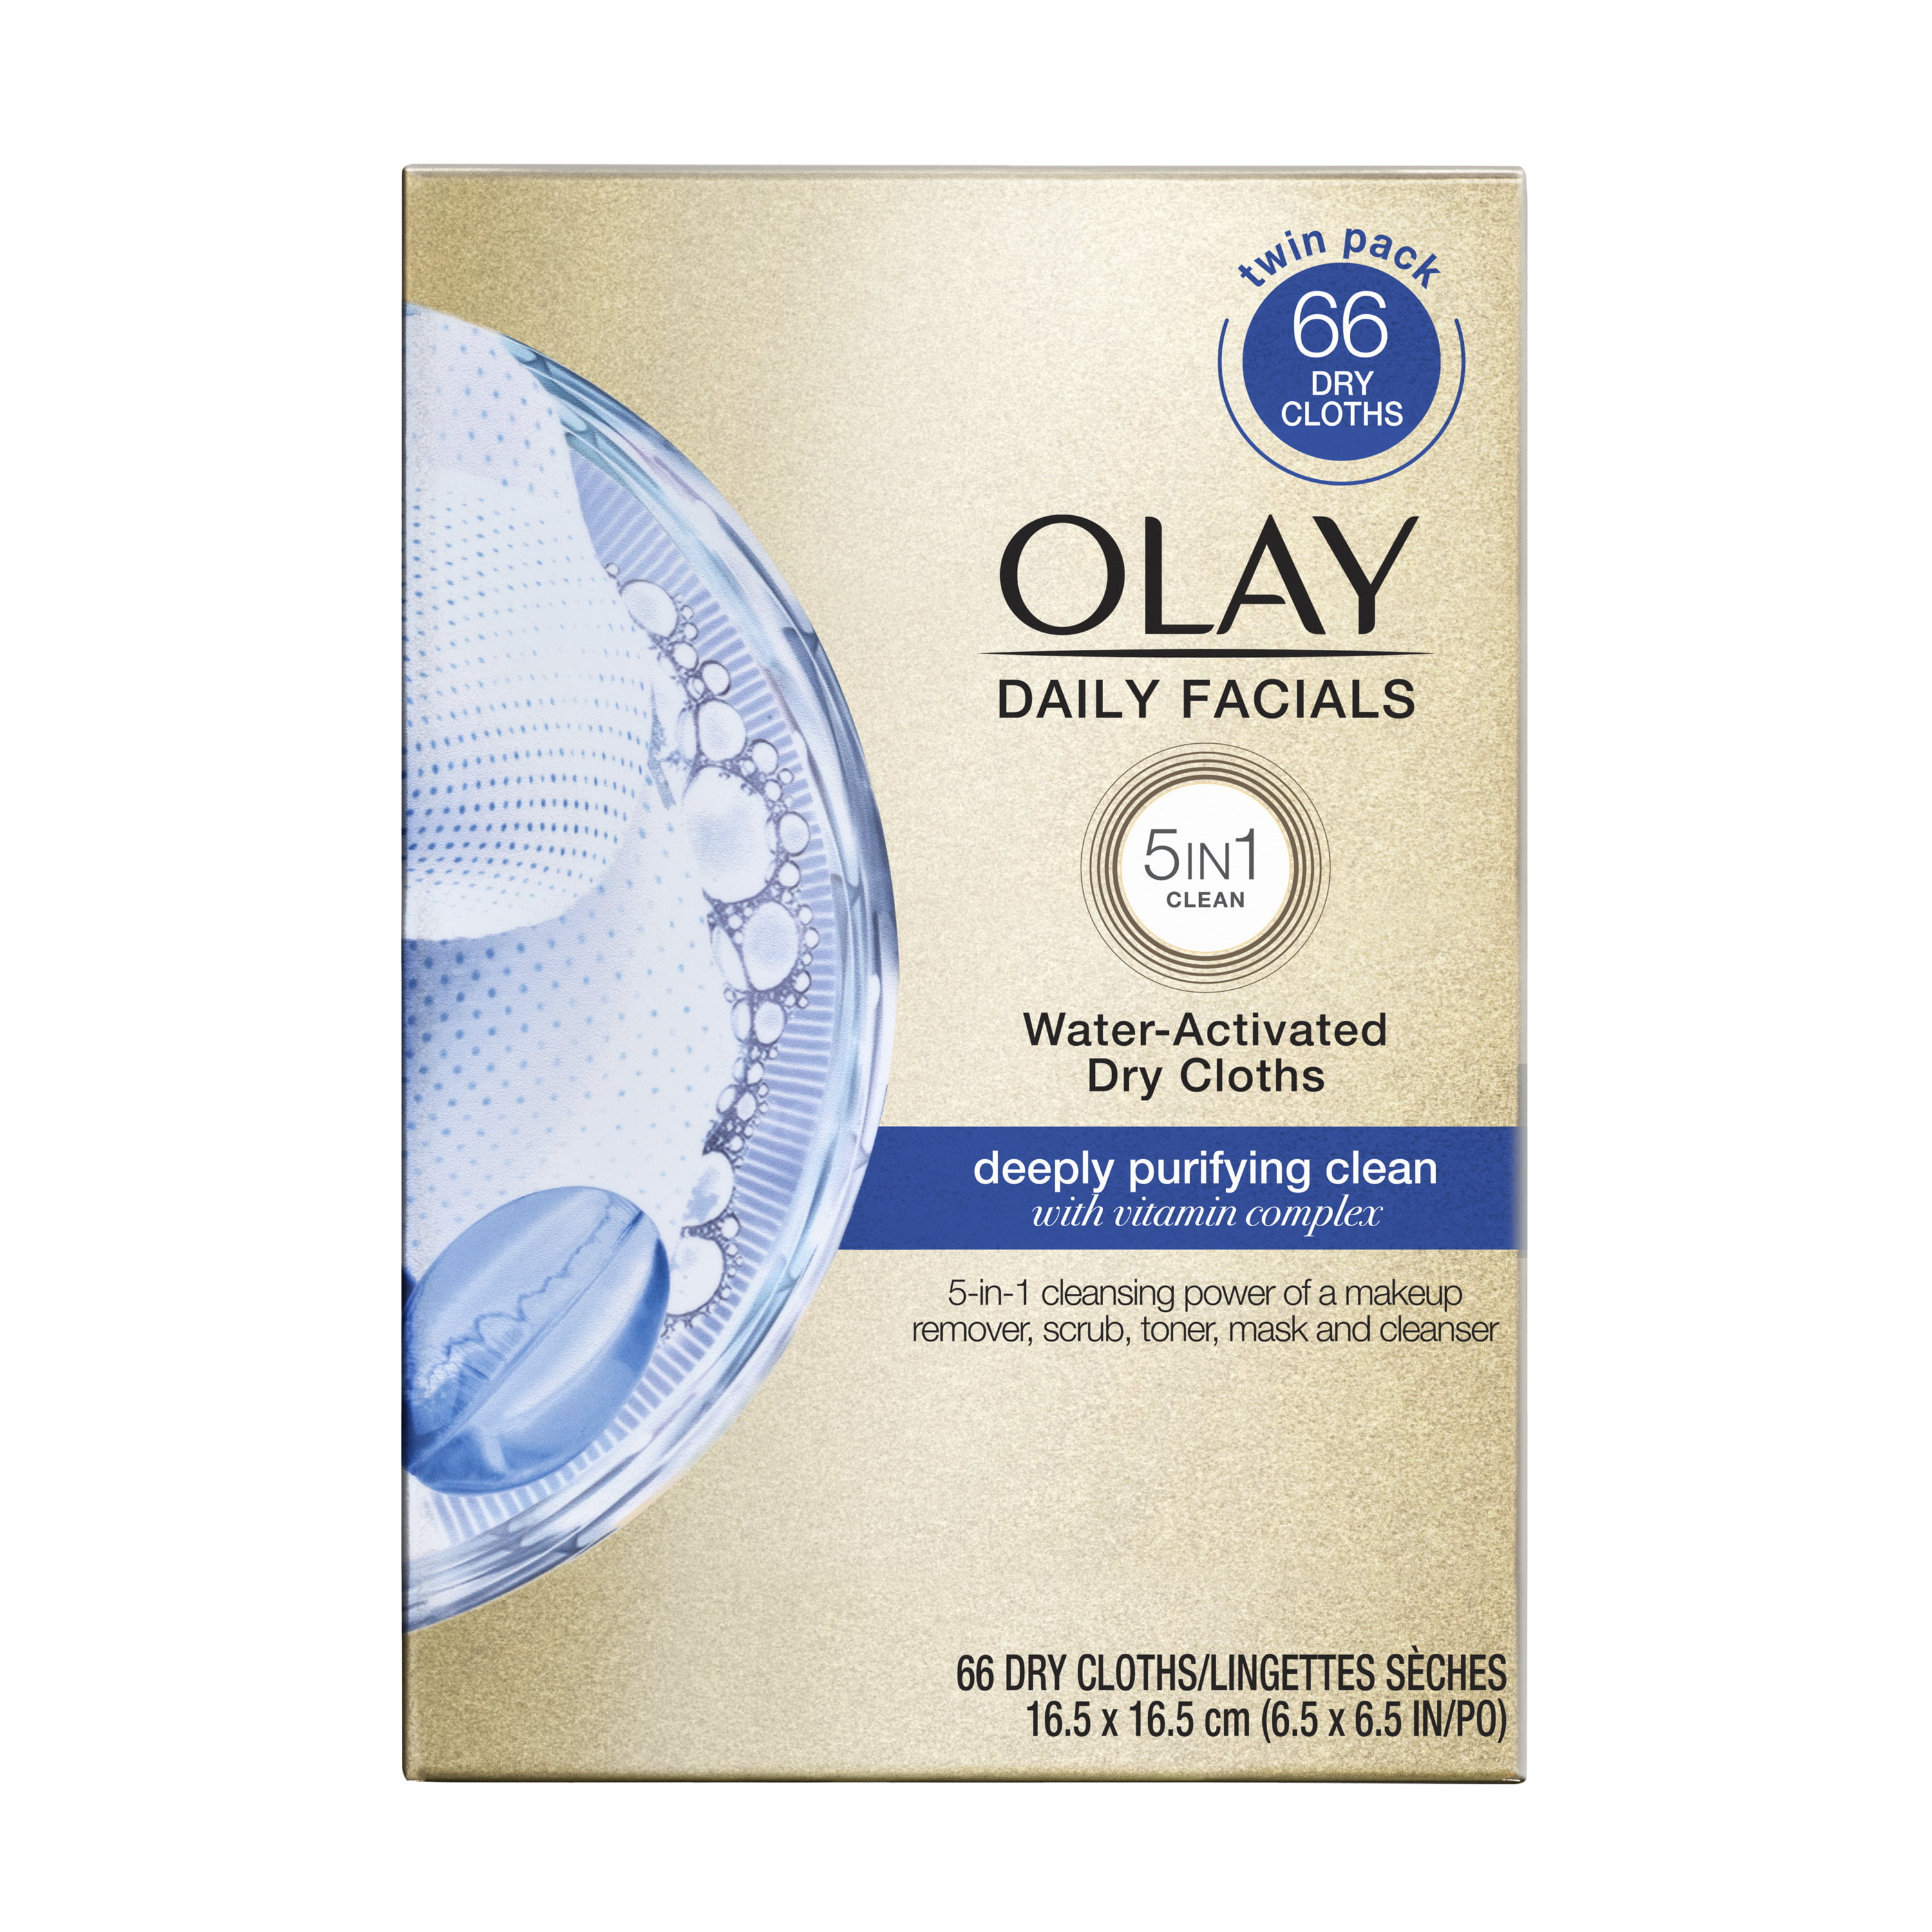 olay-daily-facials-deep-purifying-cleansing-cloths-66-count-walmart